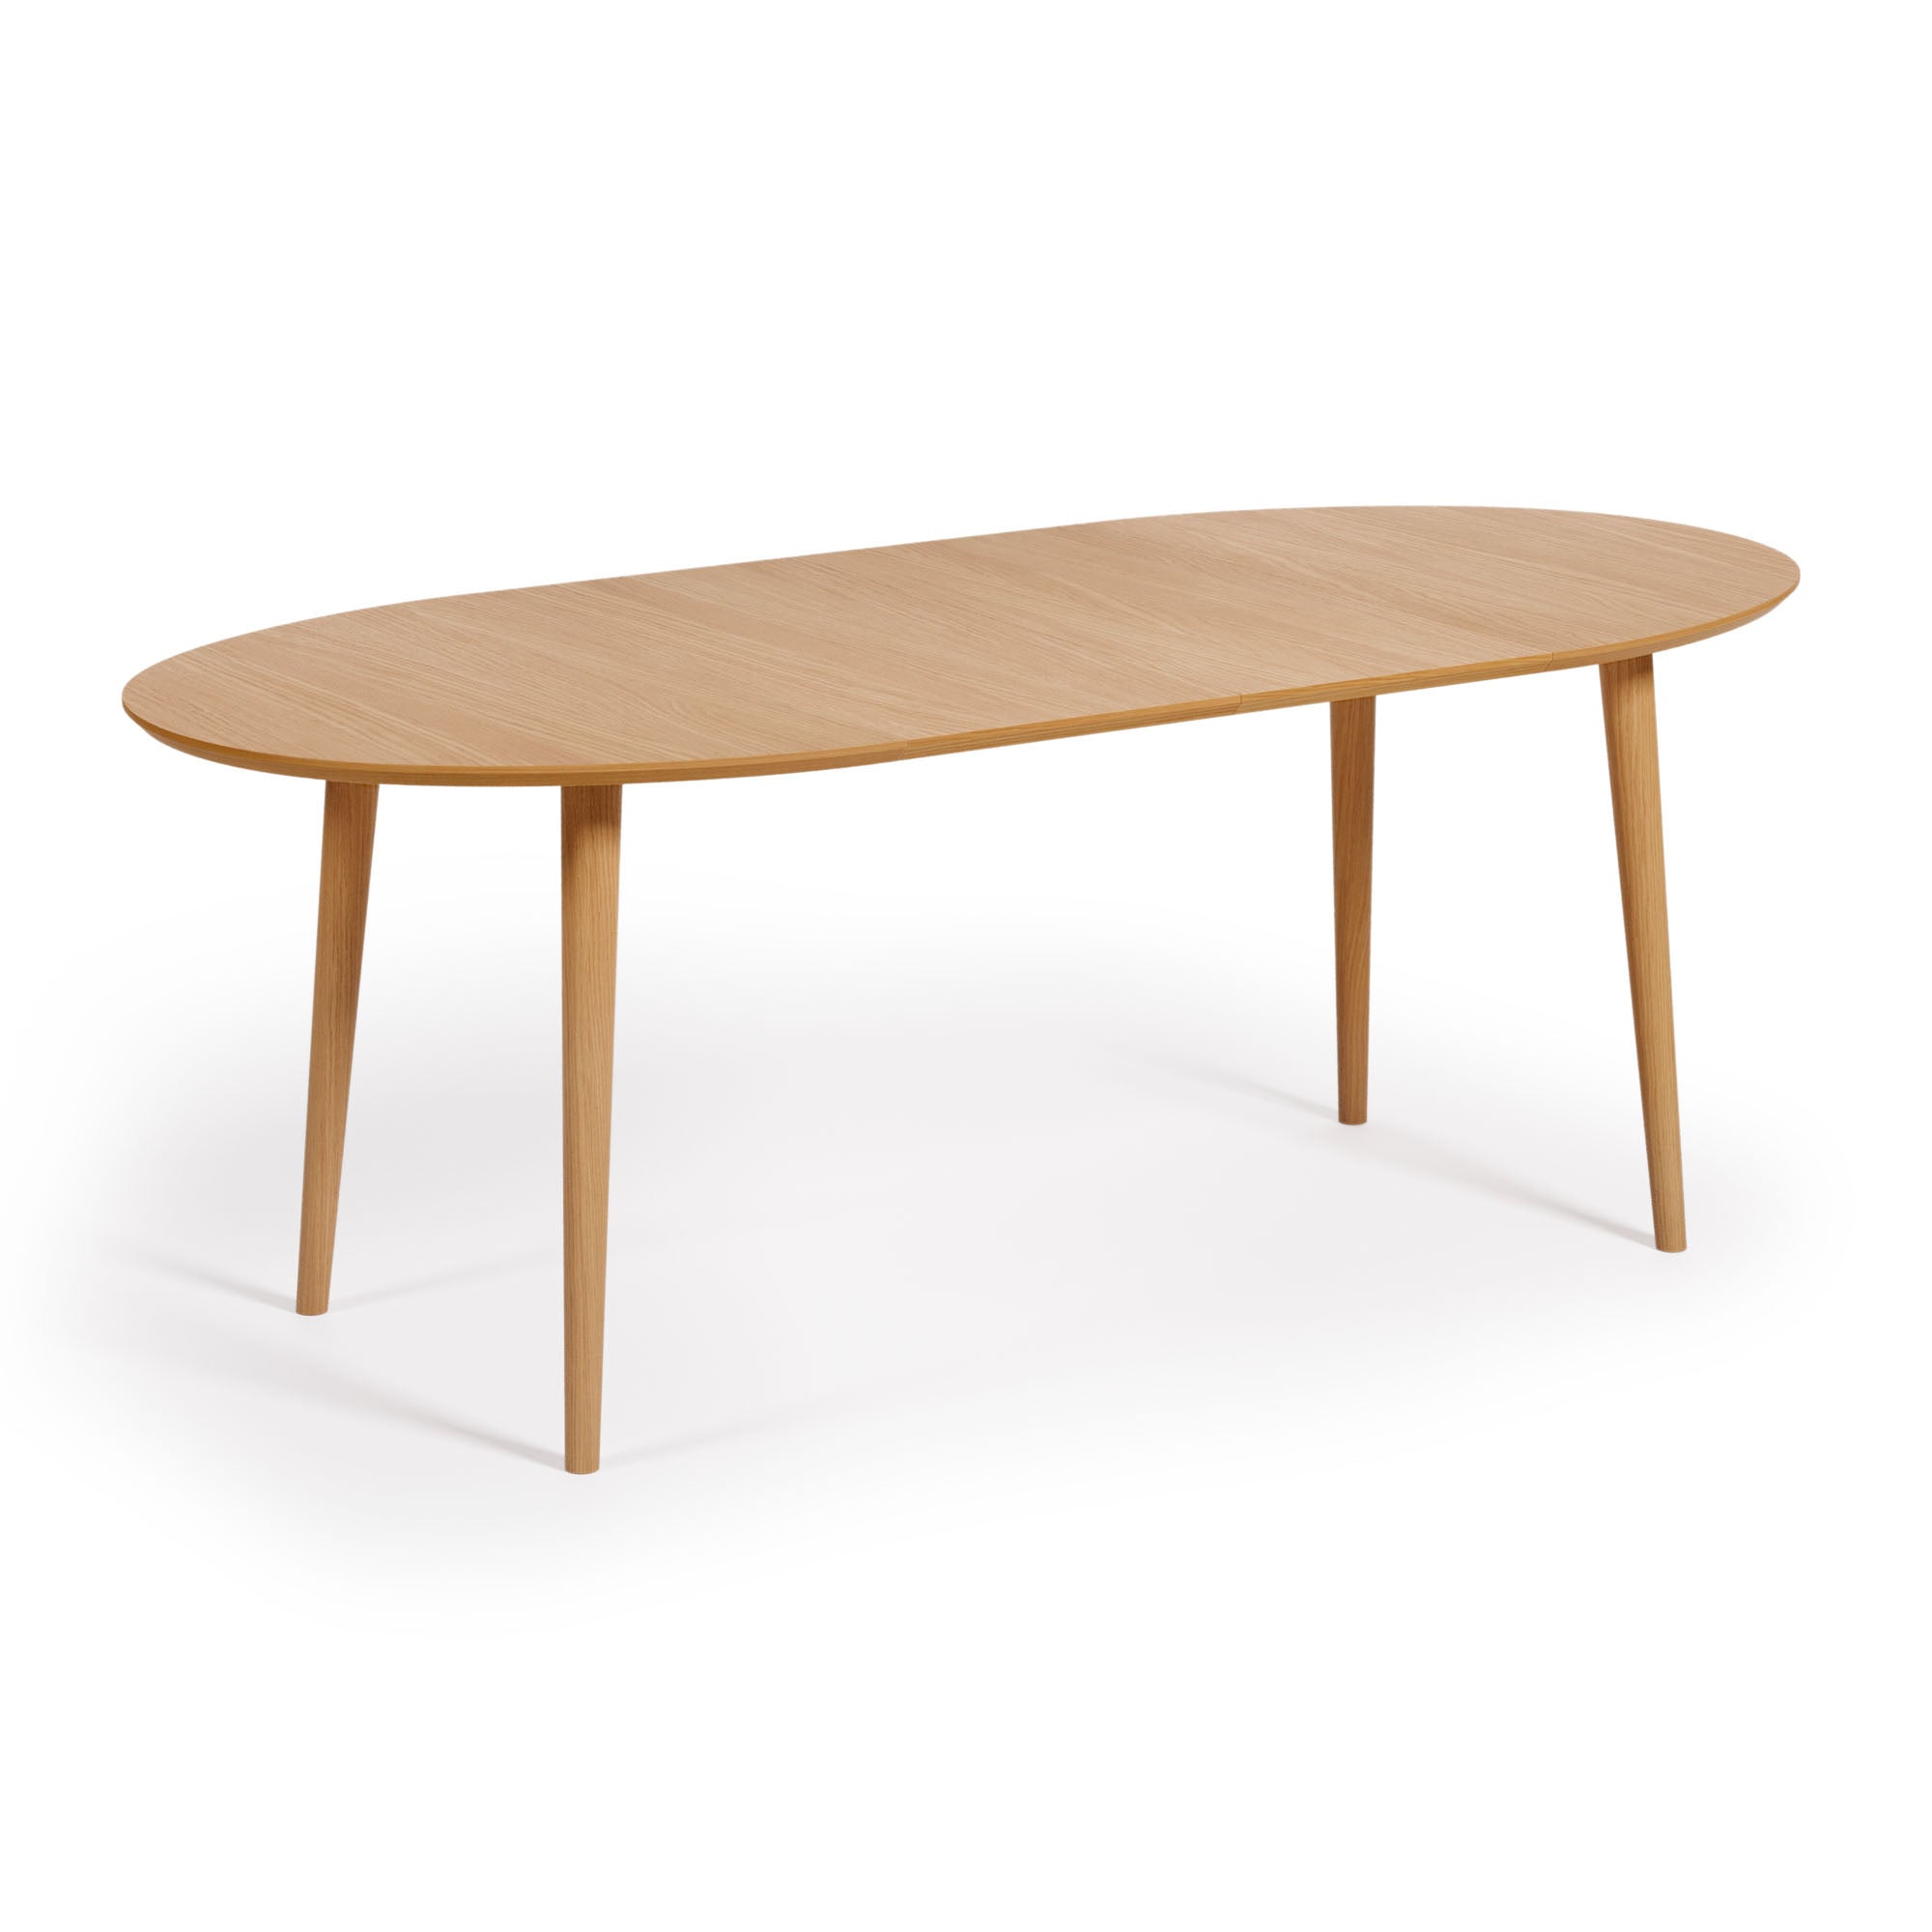 Oqui extendable oval table with an oak veneer and solid wood legs, Ø 120 (200) x 90 cm